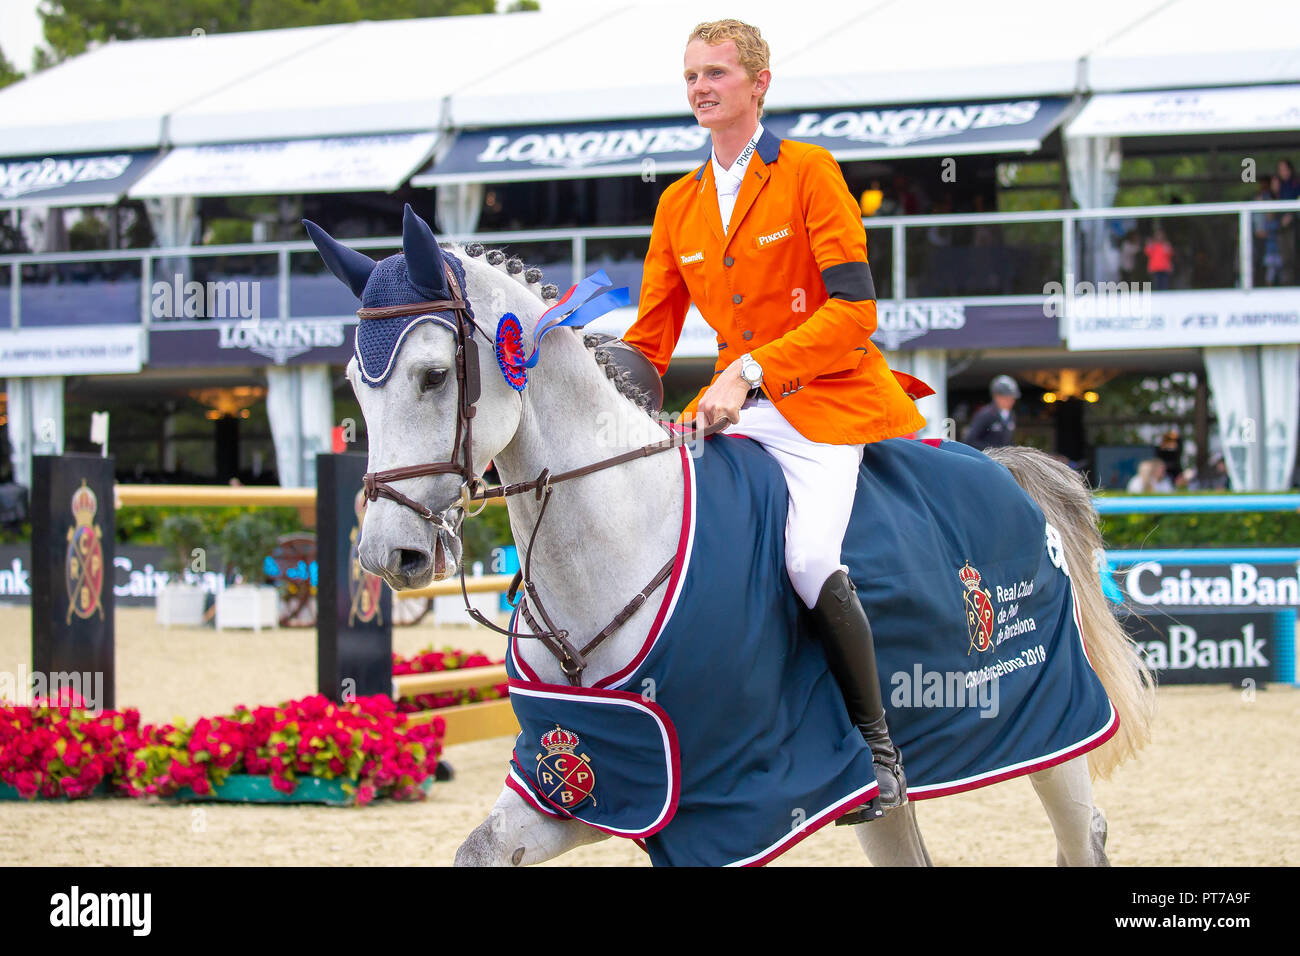 Barcelona, Spain. 7th October 2018. Winner. Frank Schuttert. NED. Riding Claus Dieter. Lap of Honour. Caixa Bank Trophy.  Longines FEI Jumping Nations Cup Final. Showjumping. Barcelona. Spain. Day 3. 07/10/2018. Stock Photo